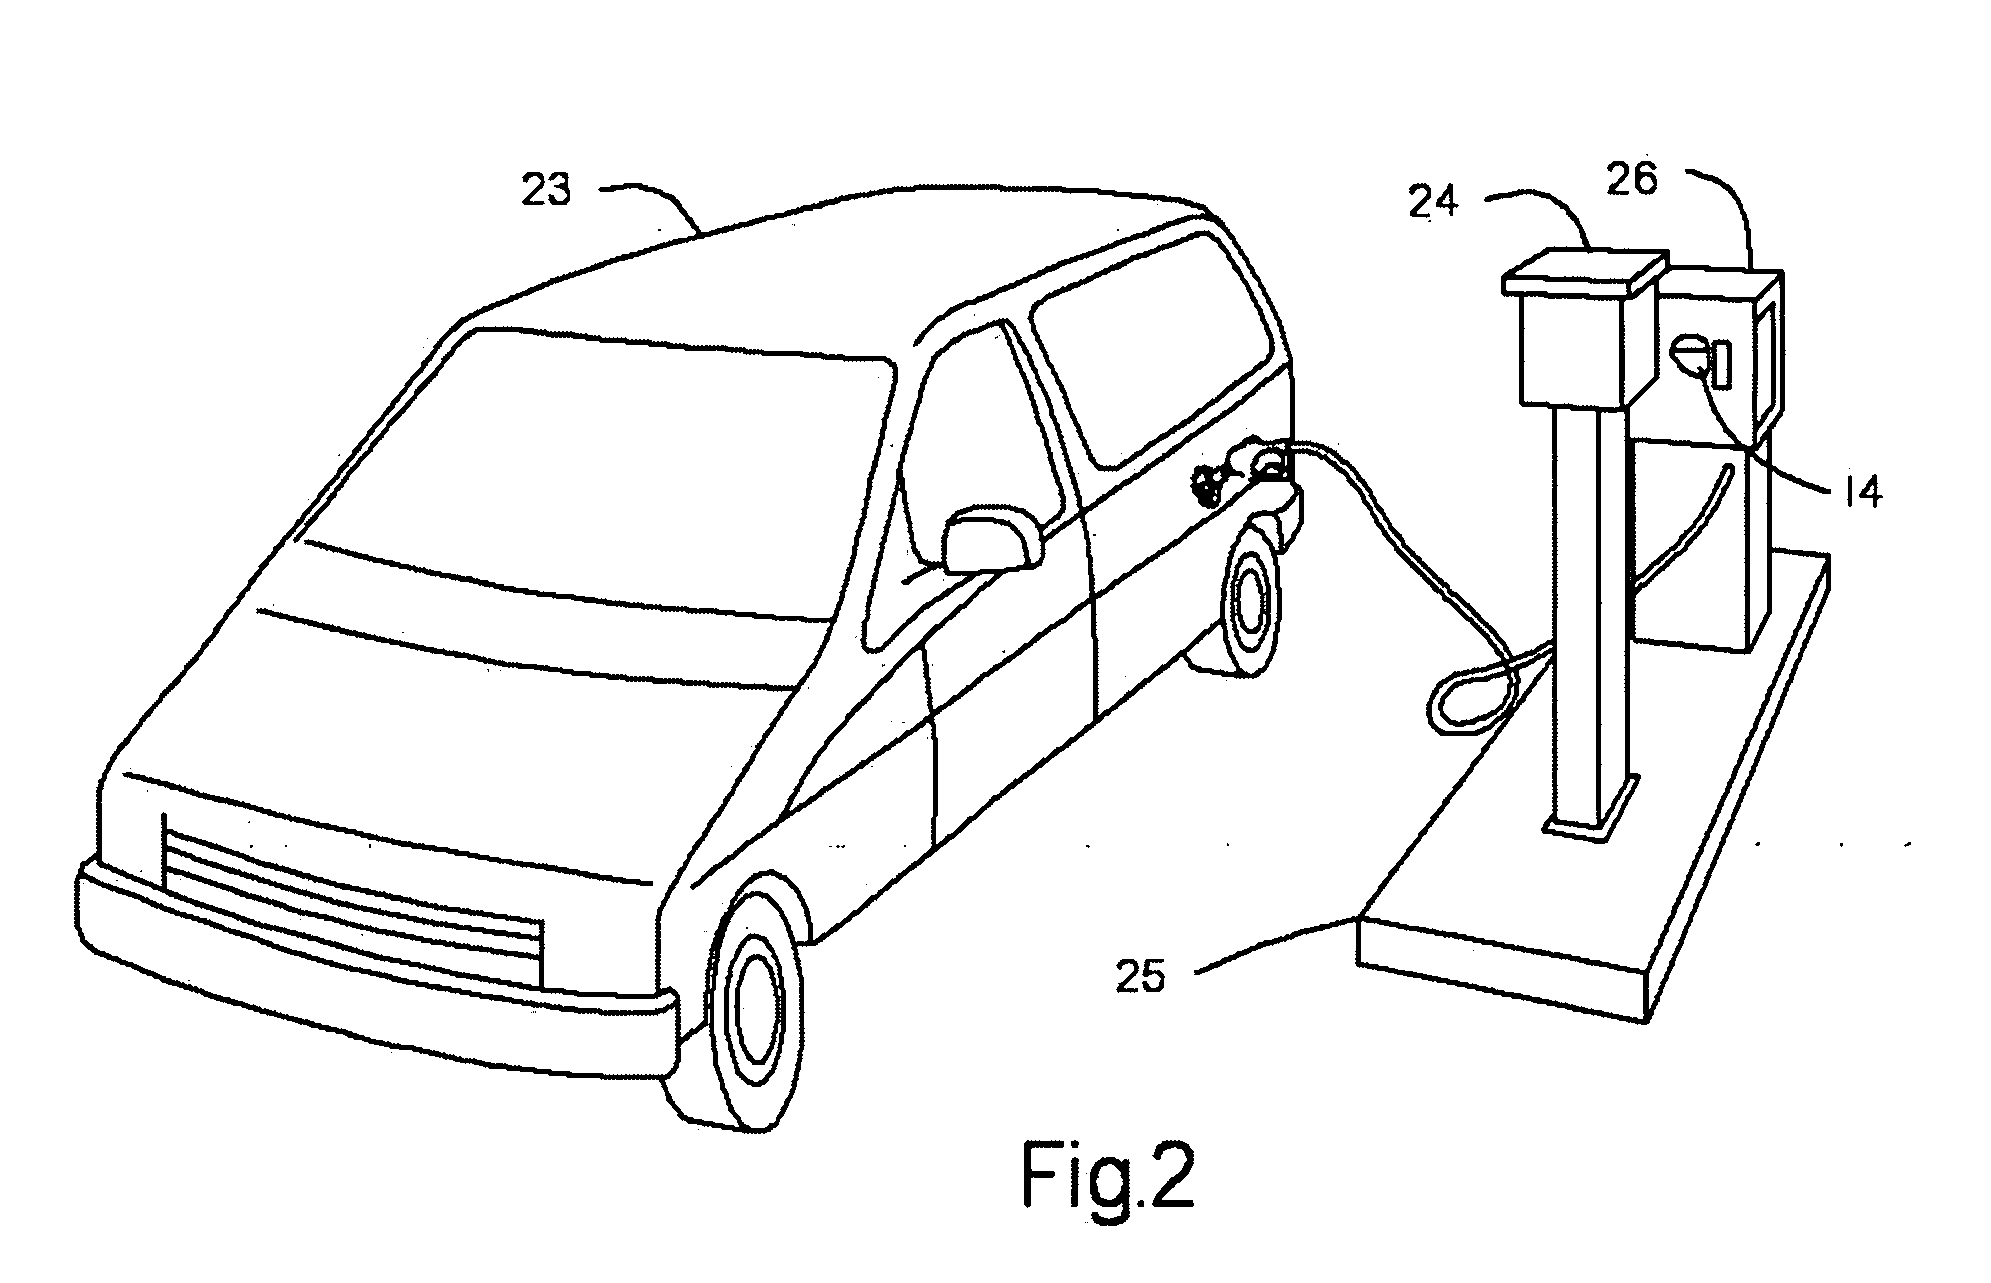 Apparatus for an automotive data control, acquisition and transfer system